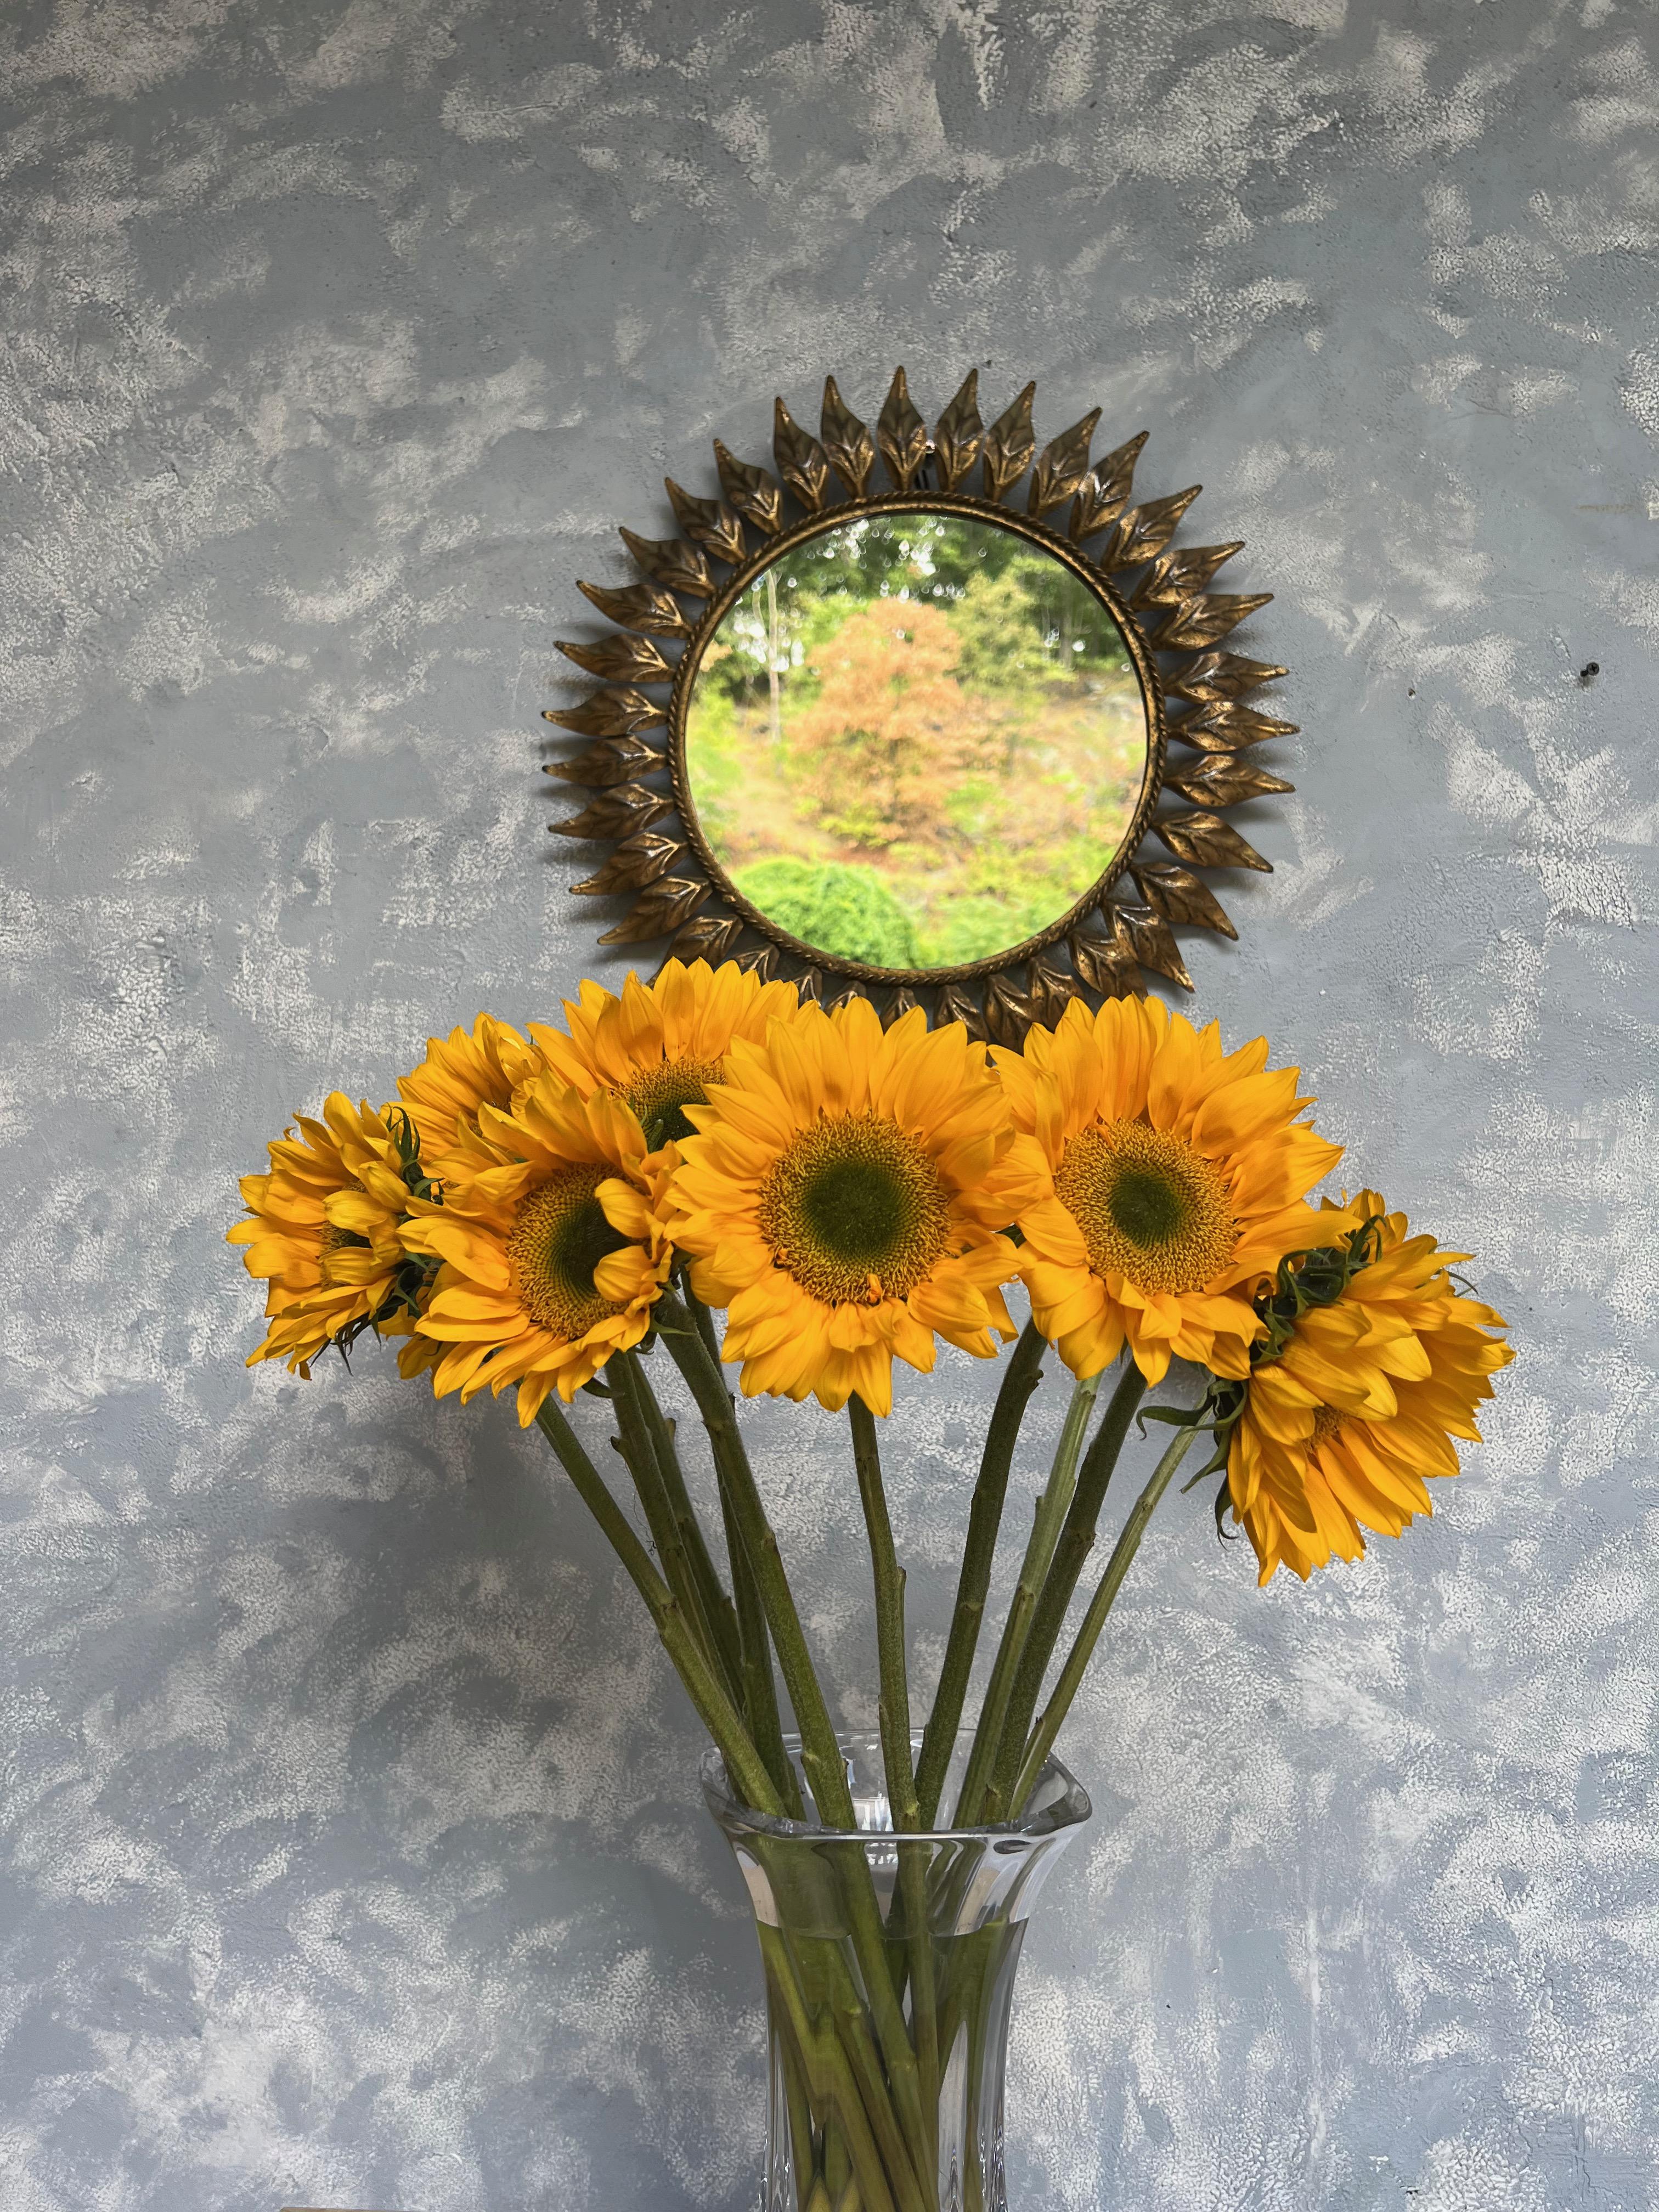 Small Spanish Round Gilt Metal Sunburst Mirror In Good Condition For Sale In Buchanan, NY